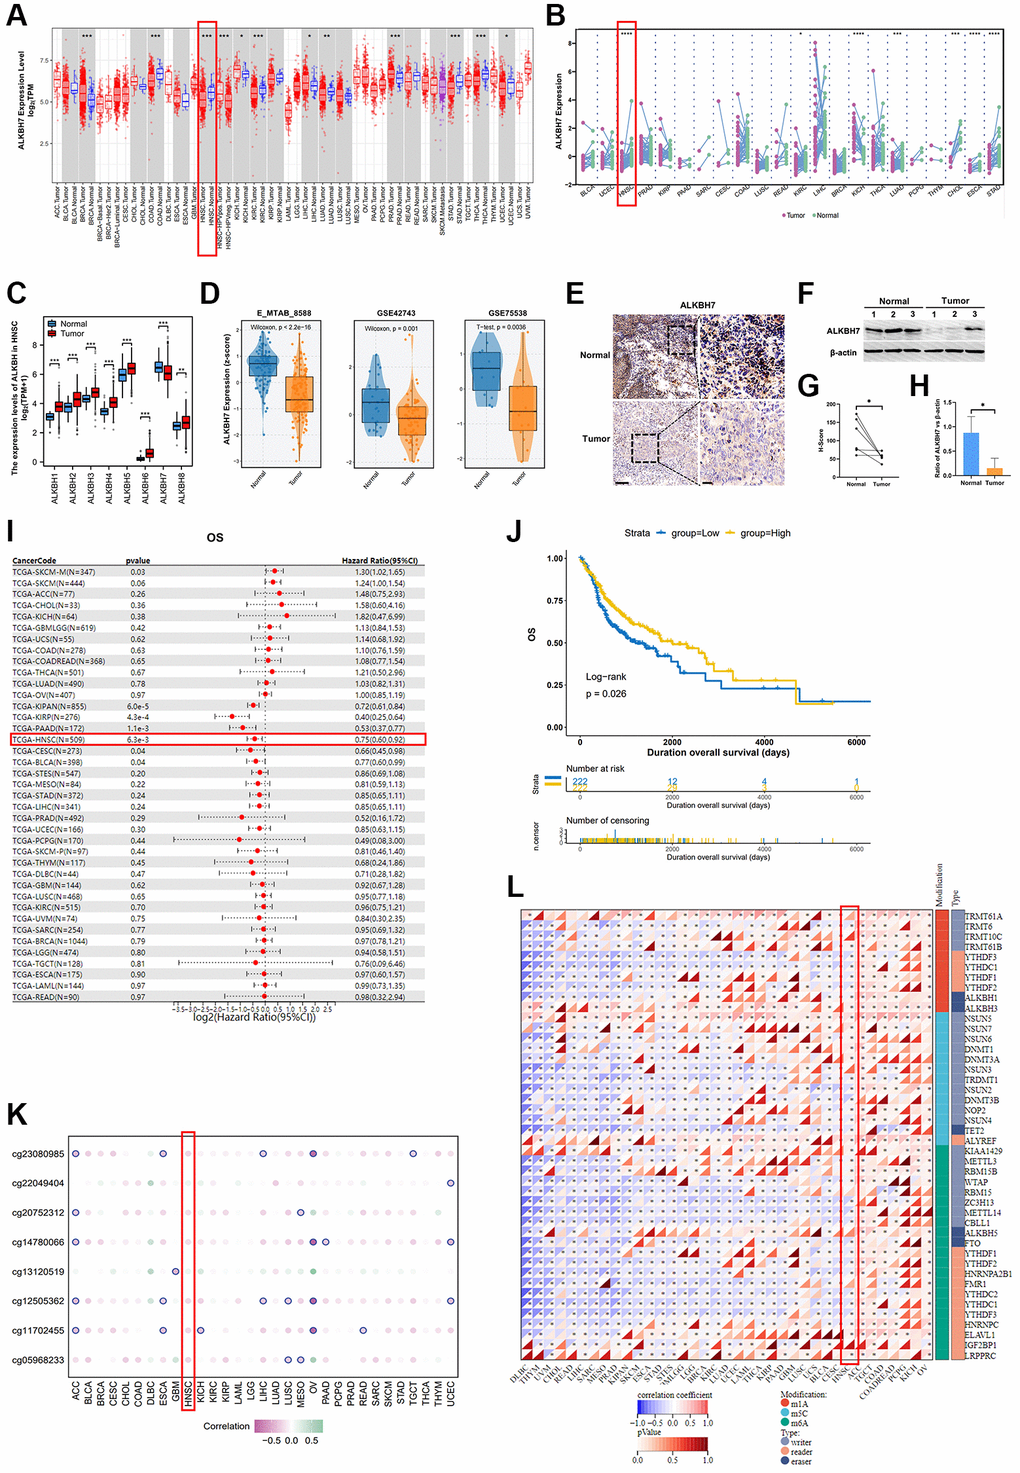 The clinical correlation of ALKBH7 expression and the modification related to ALKBH7 expression in pan cancer, especially in HNSC. (A) Differential expression of ALKBH7 in 33 cancer types and (B) in paired tumor and normal tissues of 22 cancer types from the TCGA dataset. (C) The expression levels of ALKBH in tumor tissue and adjacent normal tissue from HNSC patients. (D) Differential expression of ALKBH7 in HNSC from various datasets. (E) Representative immunohistochemical images of ALKBH7 expression in HNSC and adjacent tissues from Second Affiliated Hospital of Naval Medical University, scale bar = 100 μm (left); 20 μm (right). (F) Western blotting of ALKBH7 differential expression in tumor tissue and adjacent normal tissue from HNSC patients. (G) Quantification of the H-score for ALKBH7 protein expressed level assessed by immunohistochemical assay. (H) Quantitative ratio of gray value for ALKBH7 protein expressed level assessed by western blotting. (I) Univariate Cox regression of ALKBH7 for OS in pan-cancers. (J) Correlation between ALKBH7 expression and OS in HNSC patients from TCGA dataset. (K) The correlation between ALKBH7 expression and DNA methylation degree in pan cancer. (L) The correlation between ALKBH7 expression and RNA modification regulator expression in pan cancer. *p **p ***p ****p 